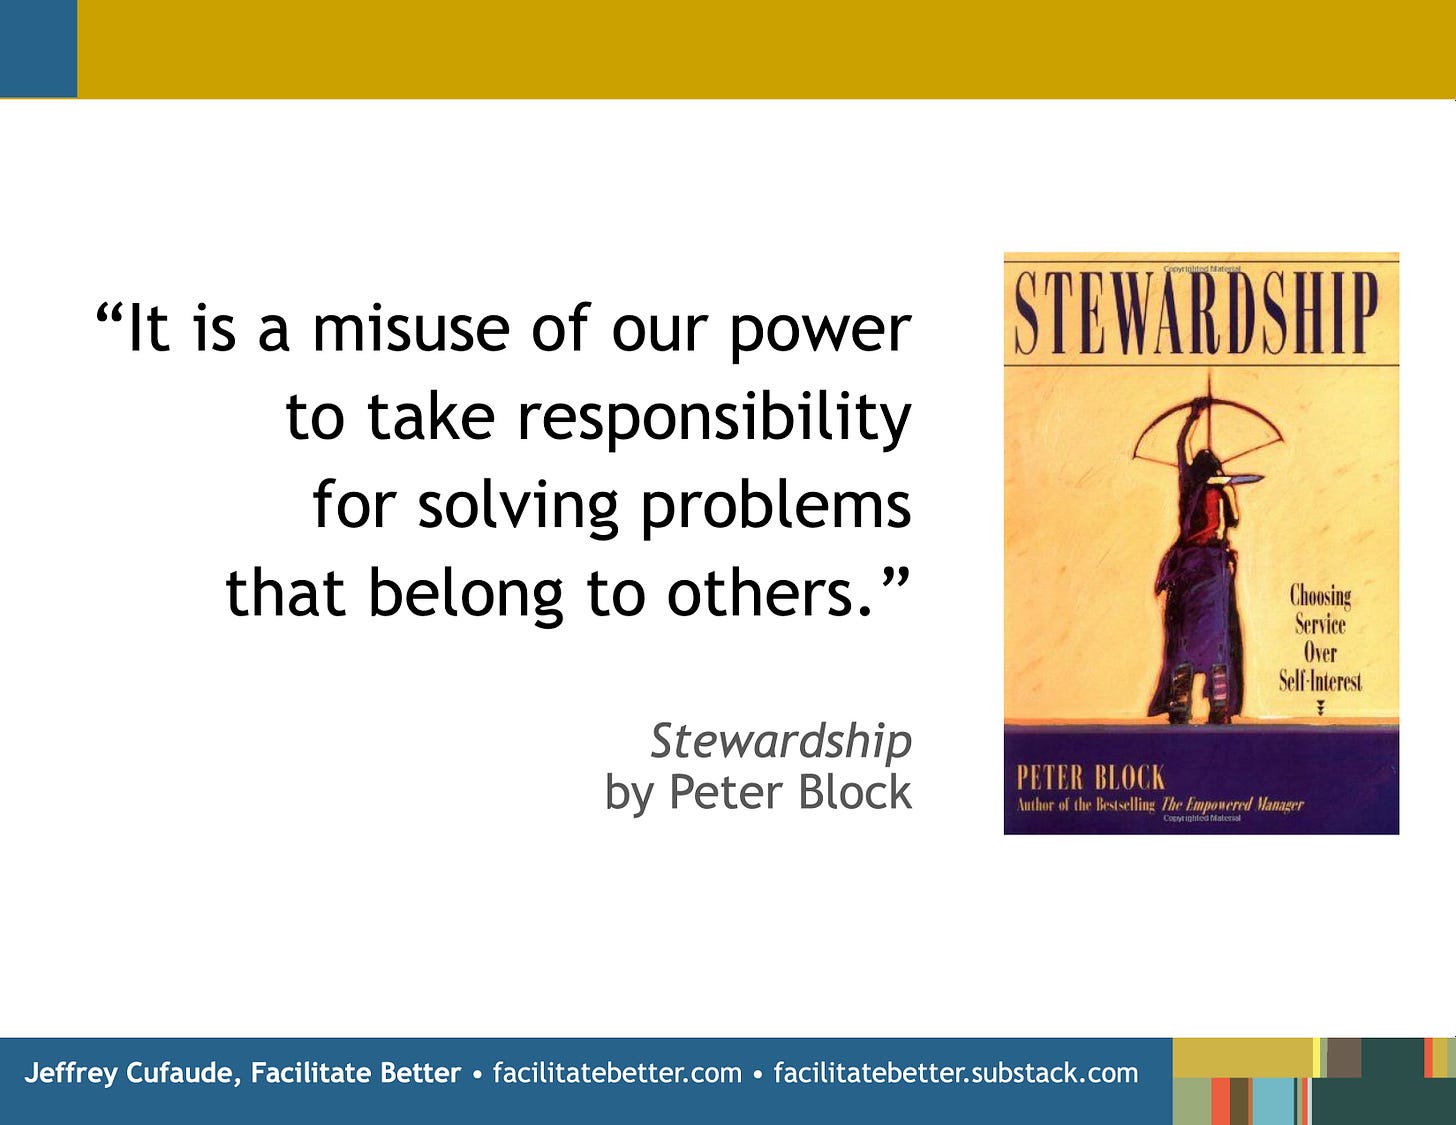 Picture of the book cover for Stewardship